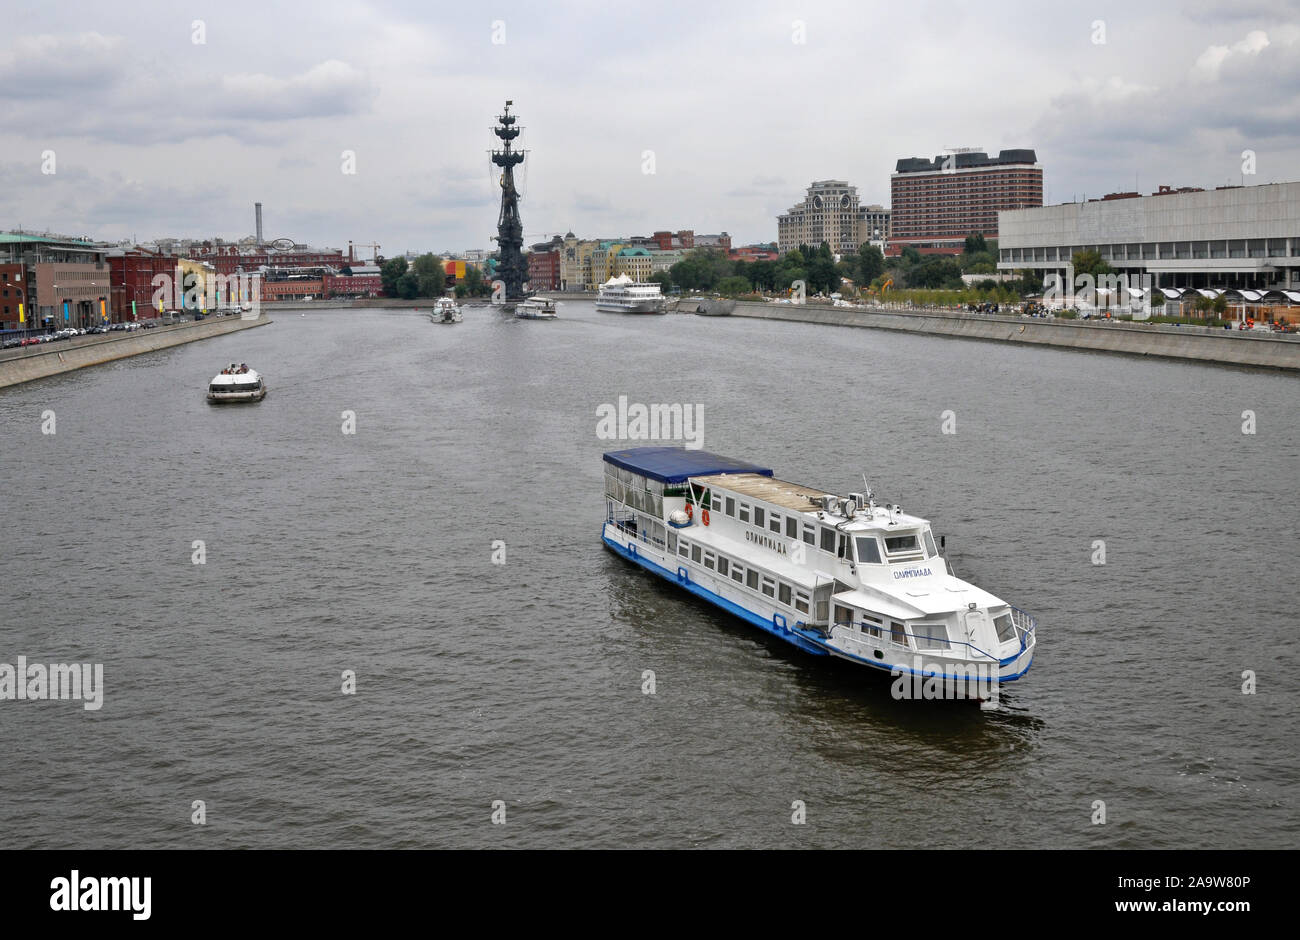 Moskva River, with Peter the Great Statue on the background. Moscow, Russia Stock Photo